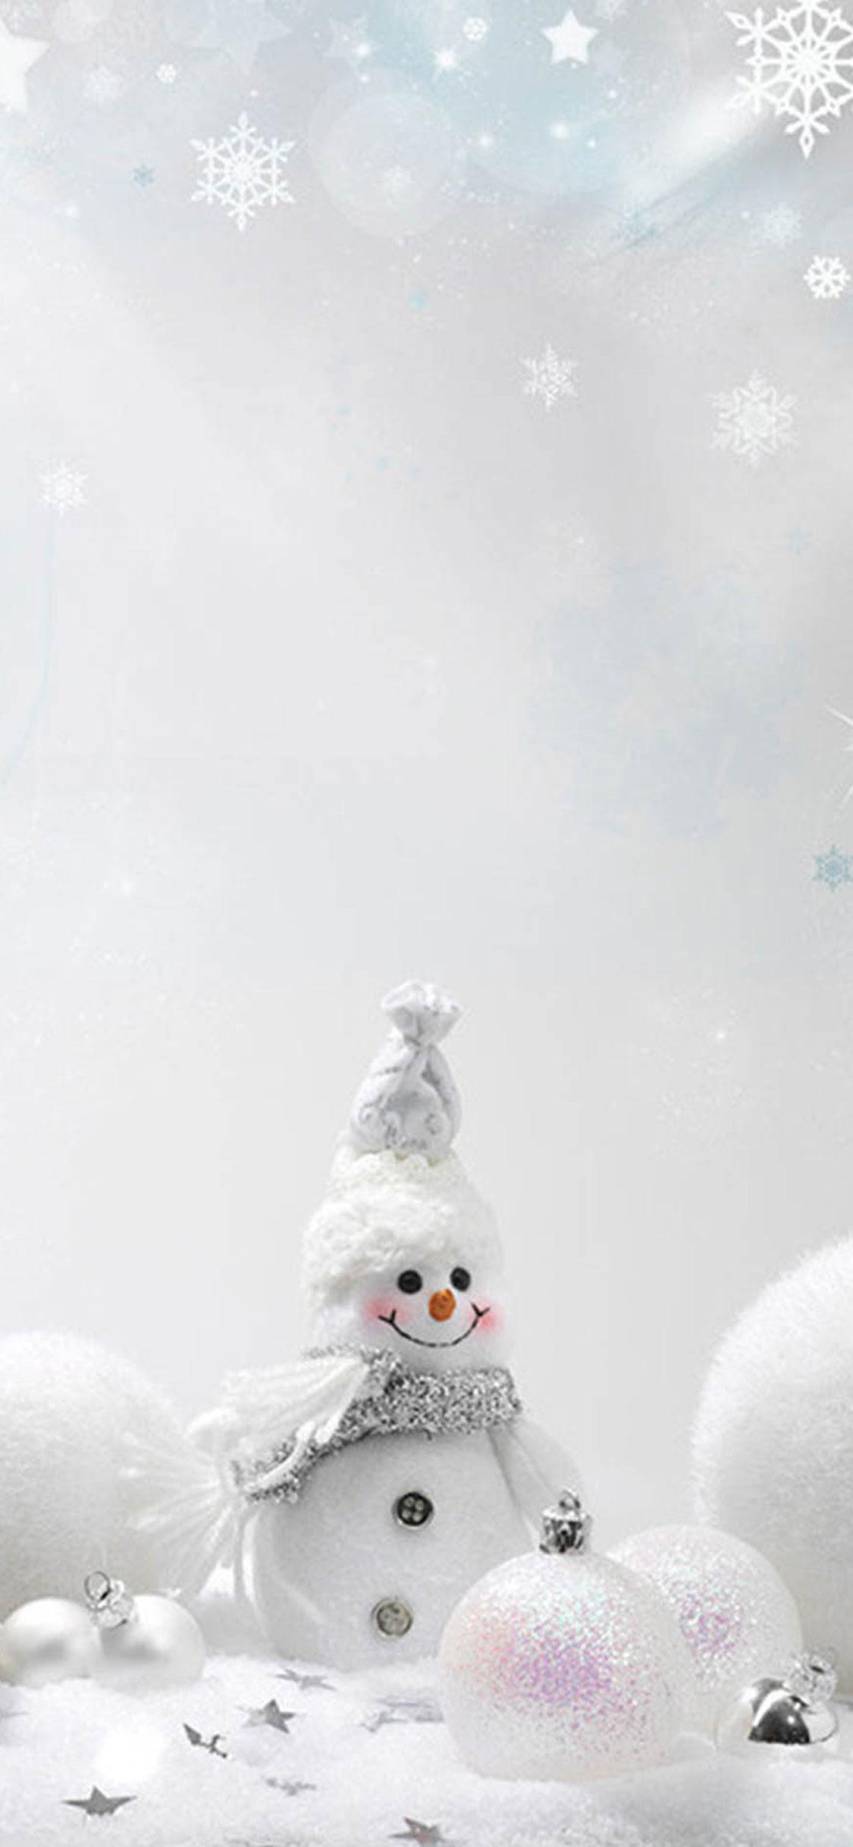 Snow Christmas Wallpaper for iPhone